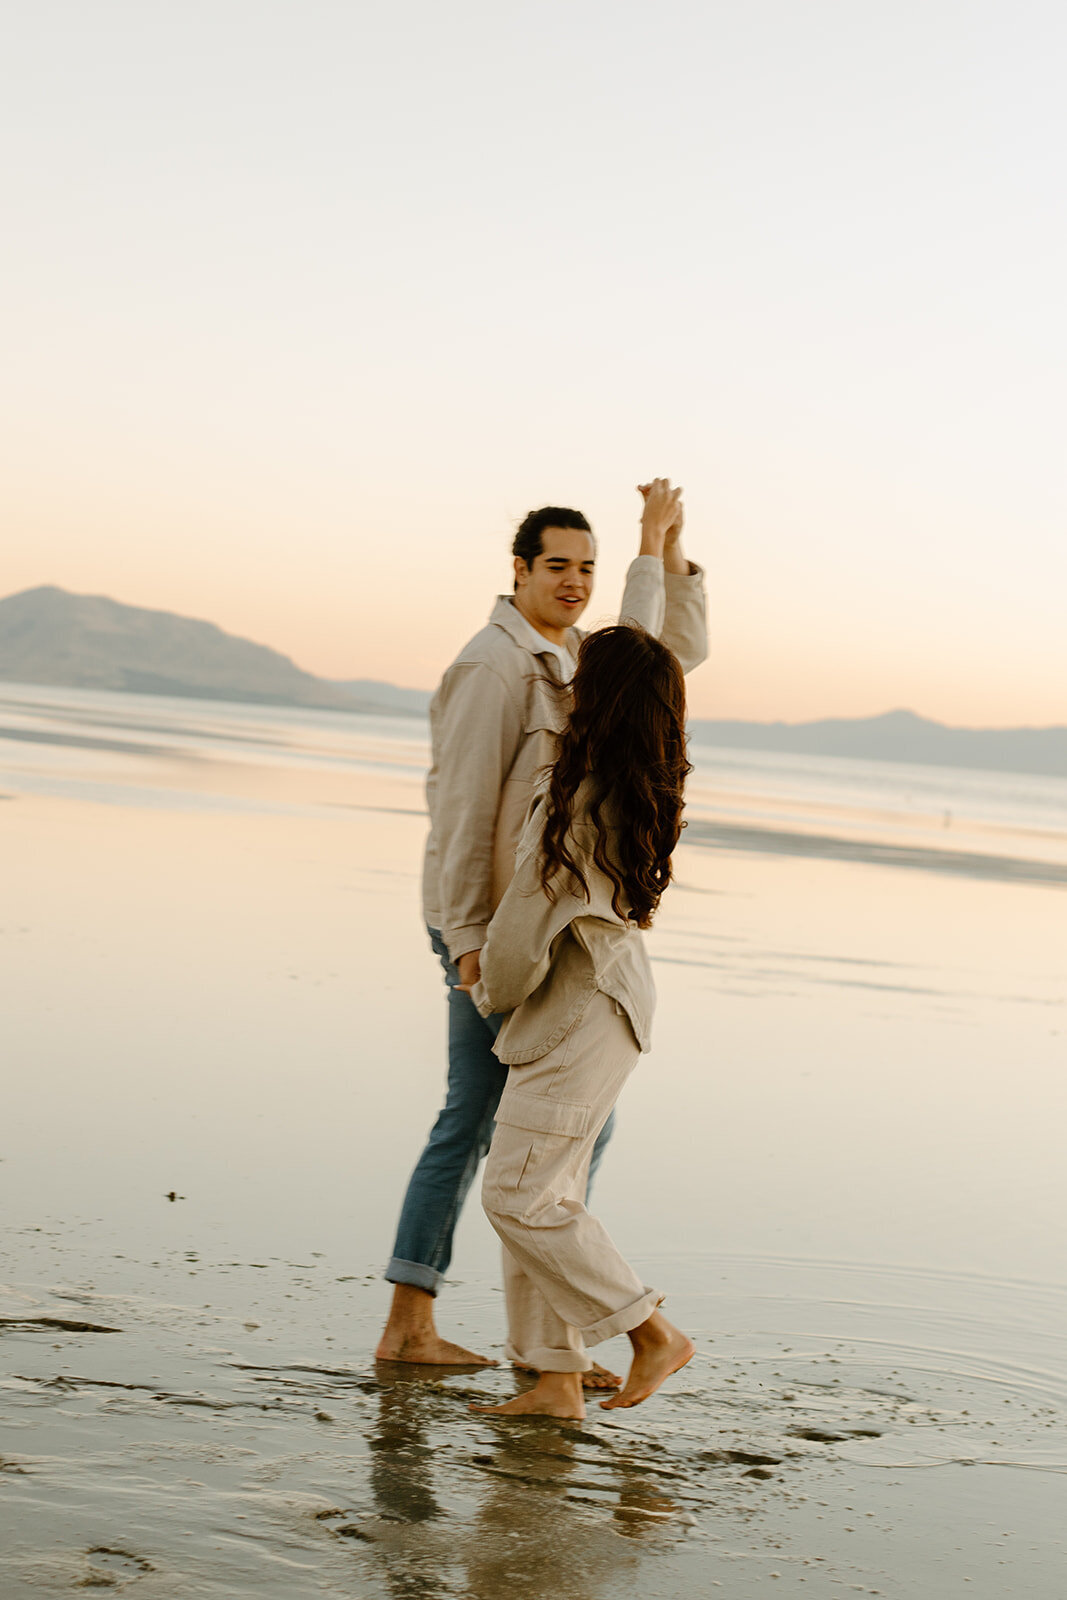 Things to remember when planning your engagement session